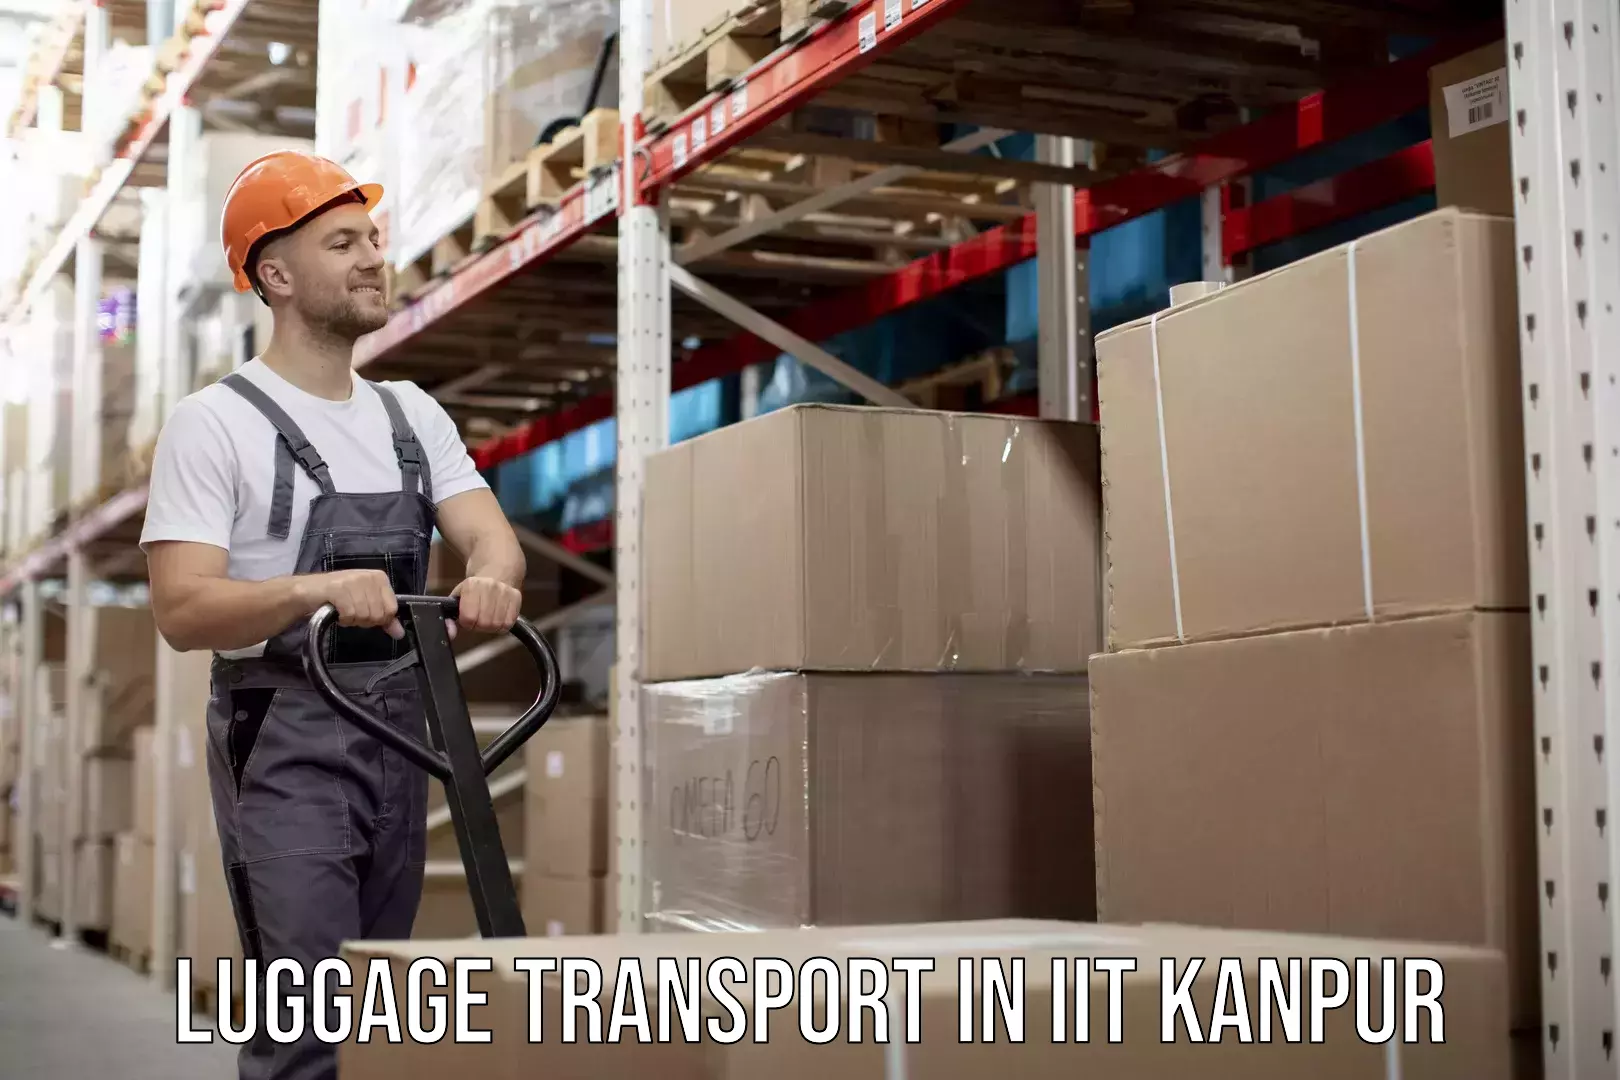 Luggage delivery rates in IIT Kanpur